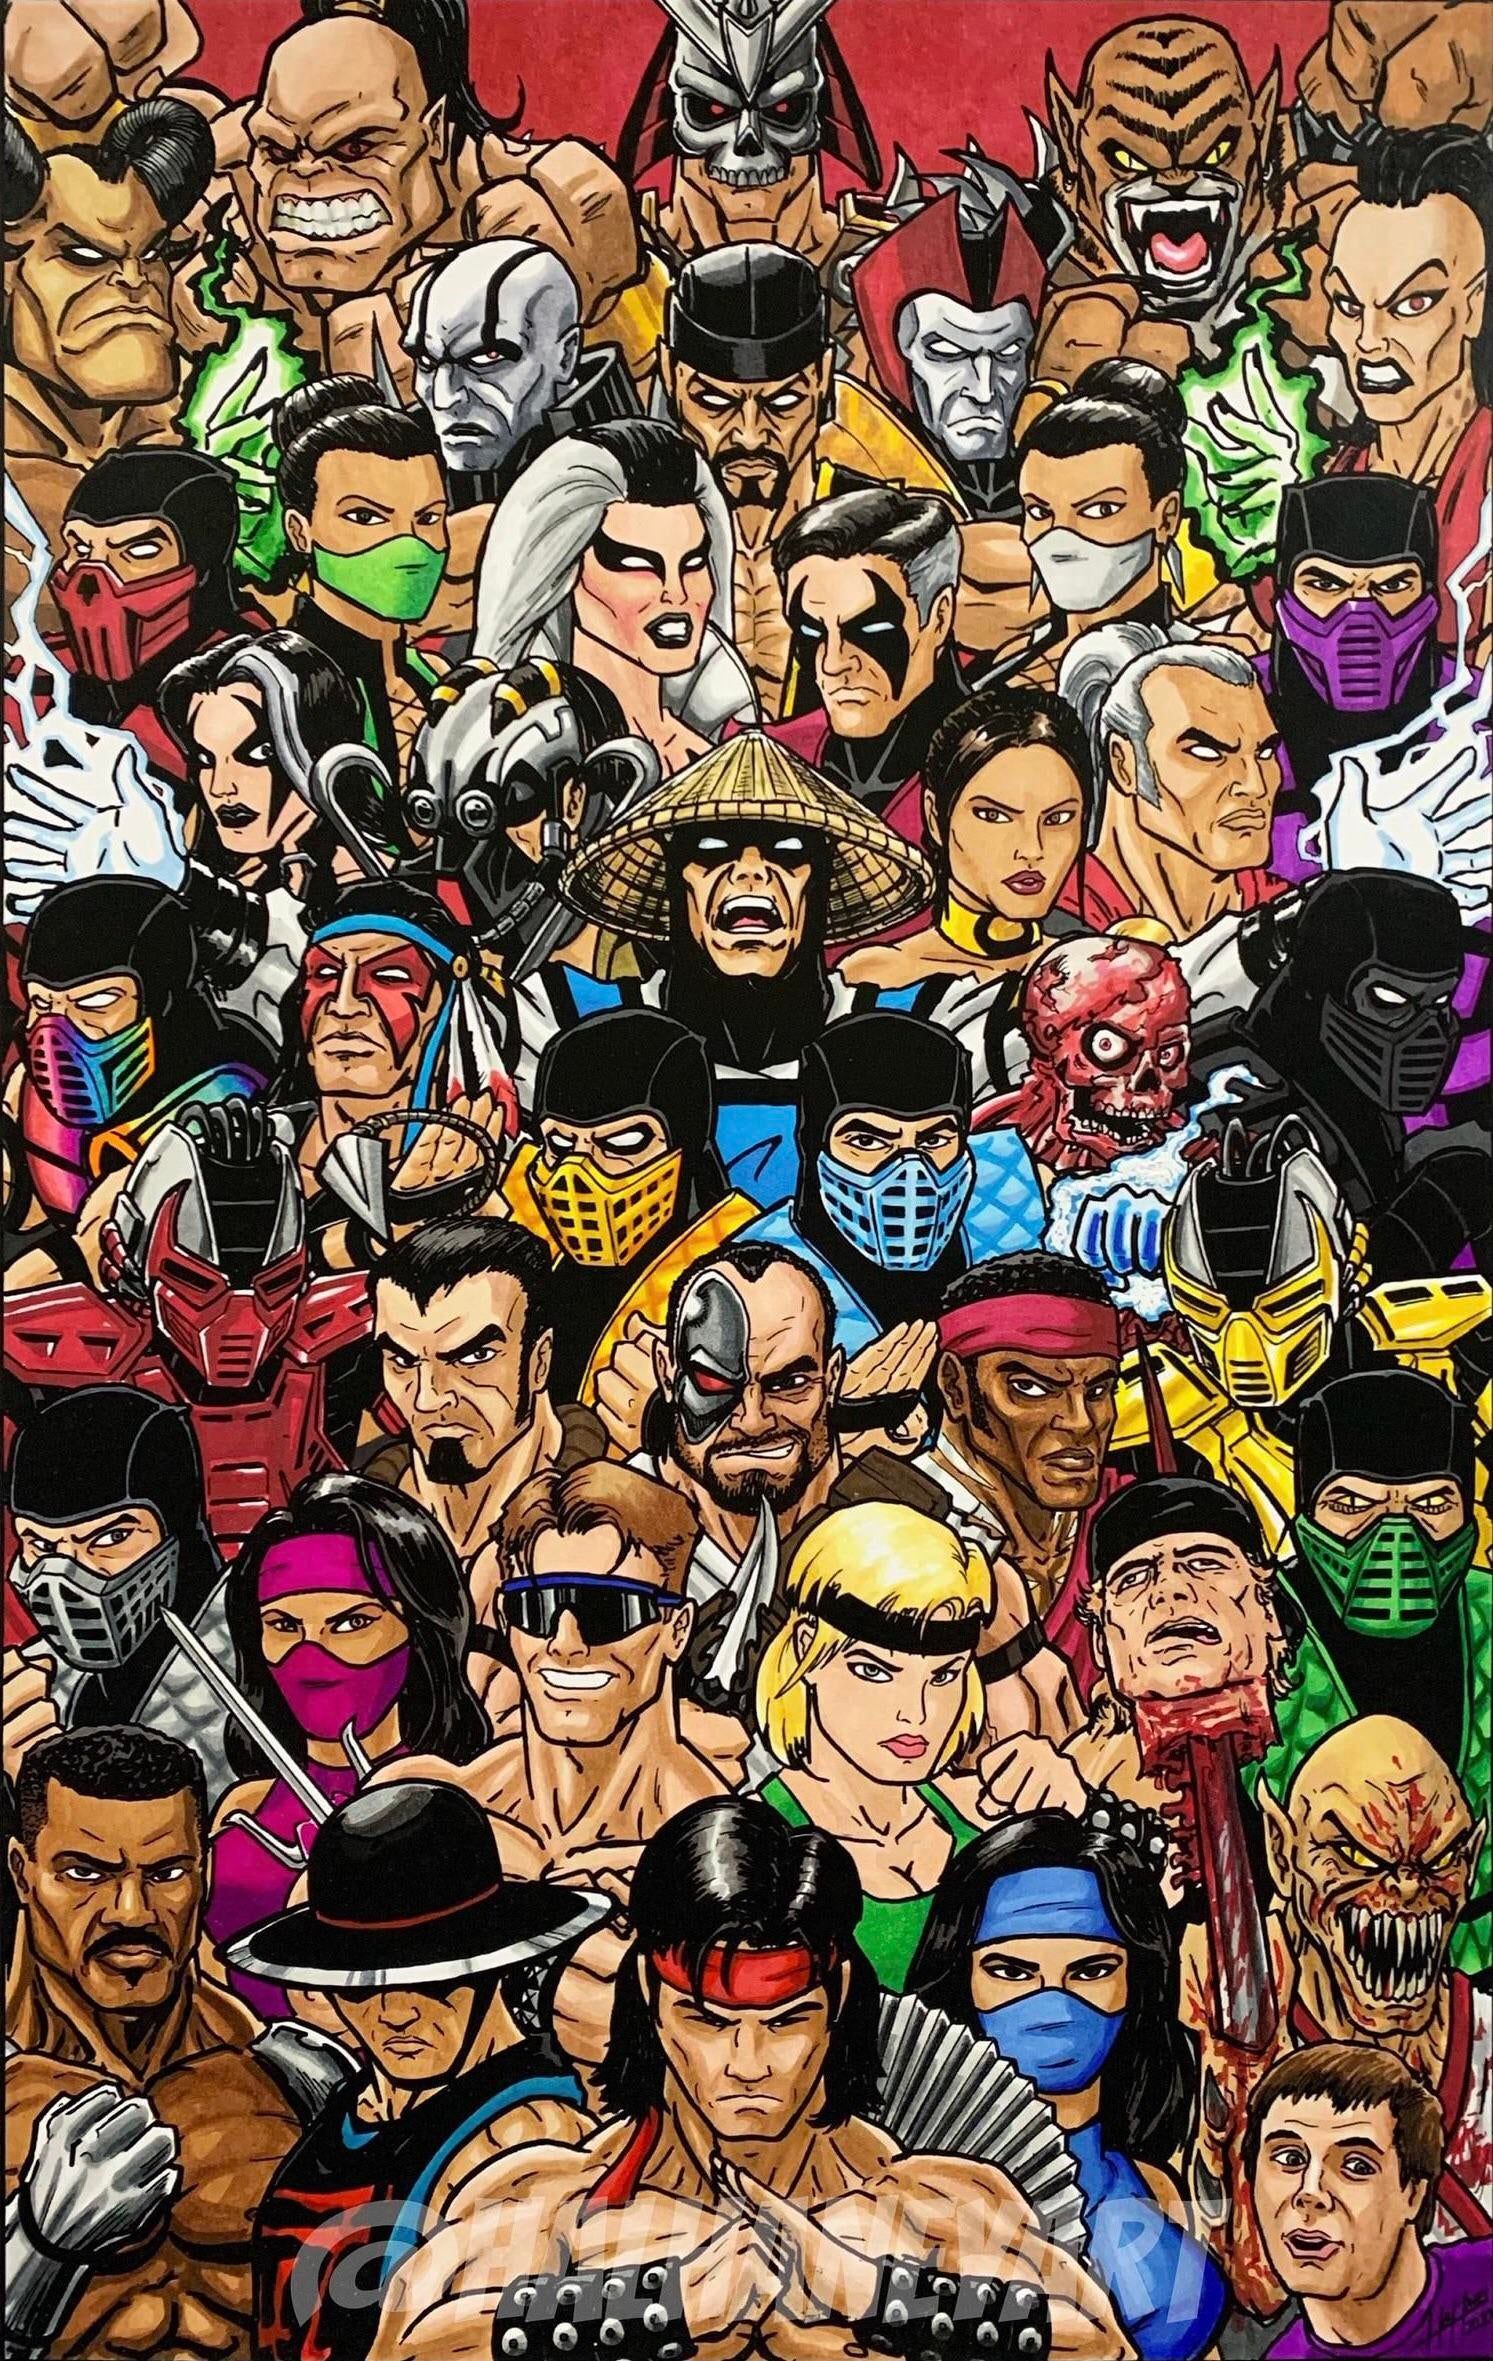 All Mortal Kombat fans. This is what I have as a wallpaper